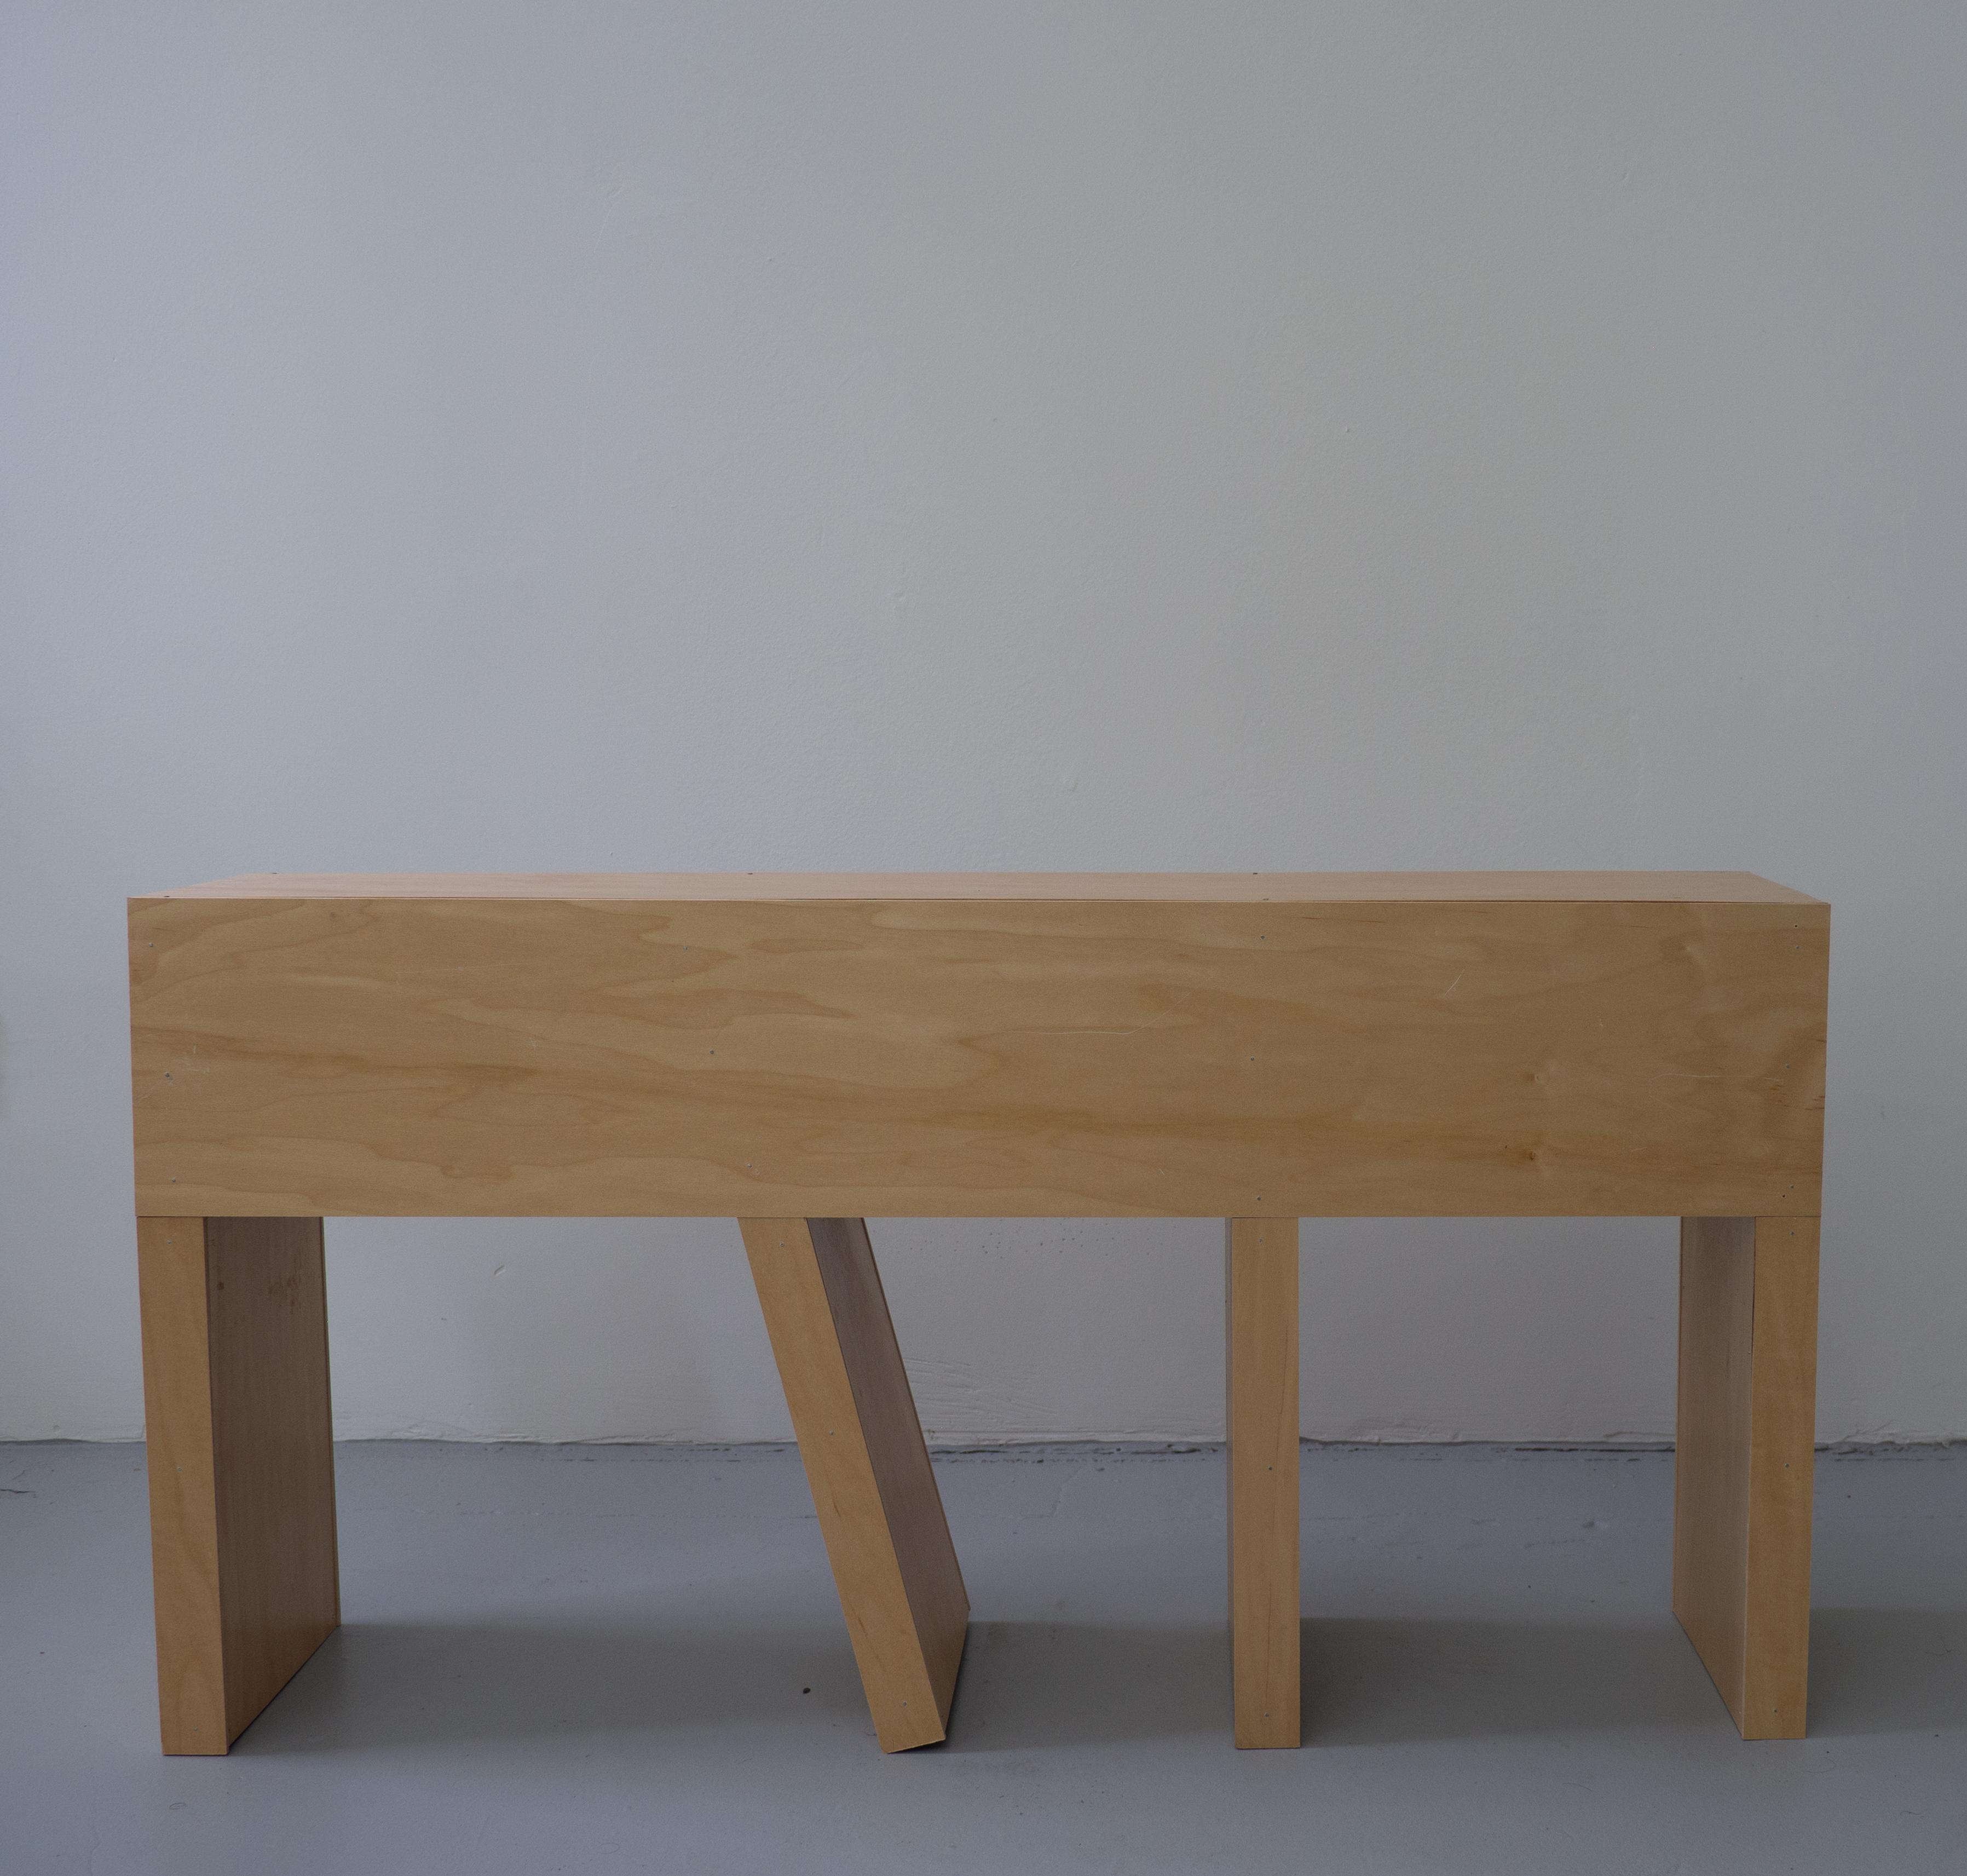 Four legged wooden bench against a white wall, sitting on a gray floor. One leg is off-kilter but still touches the ground